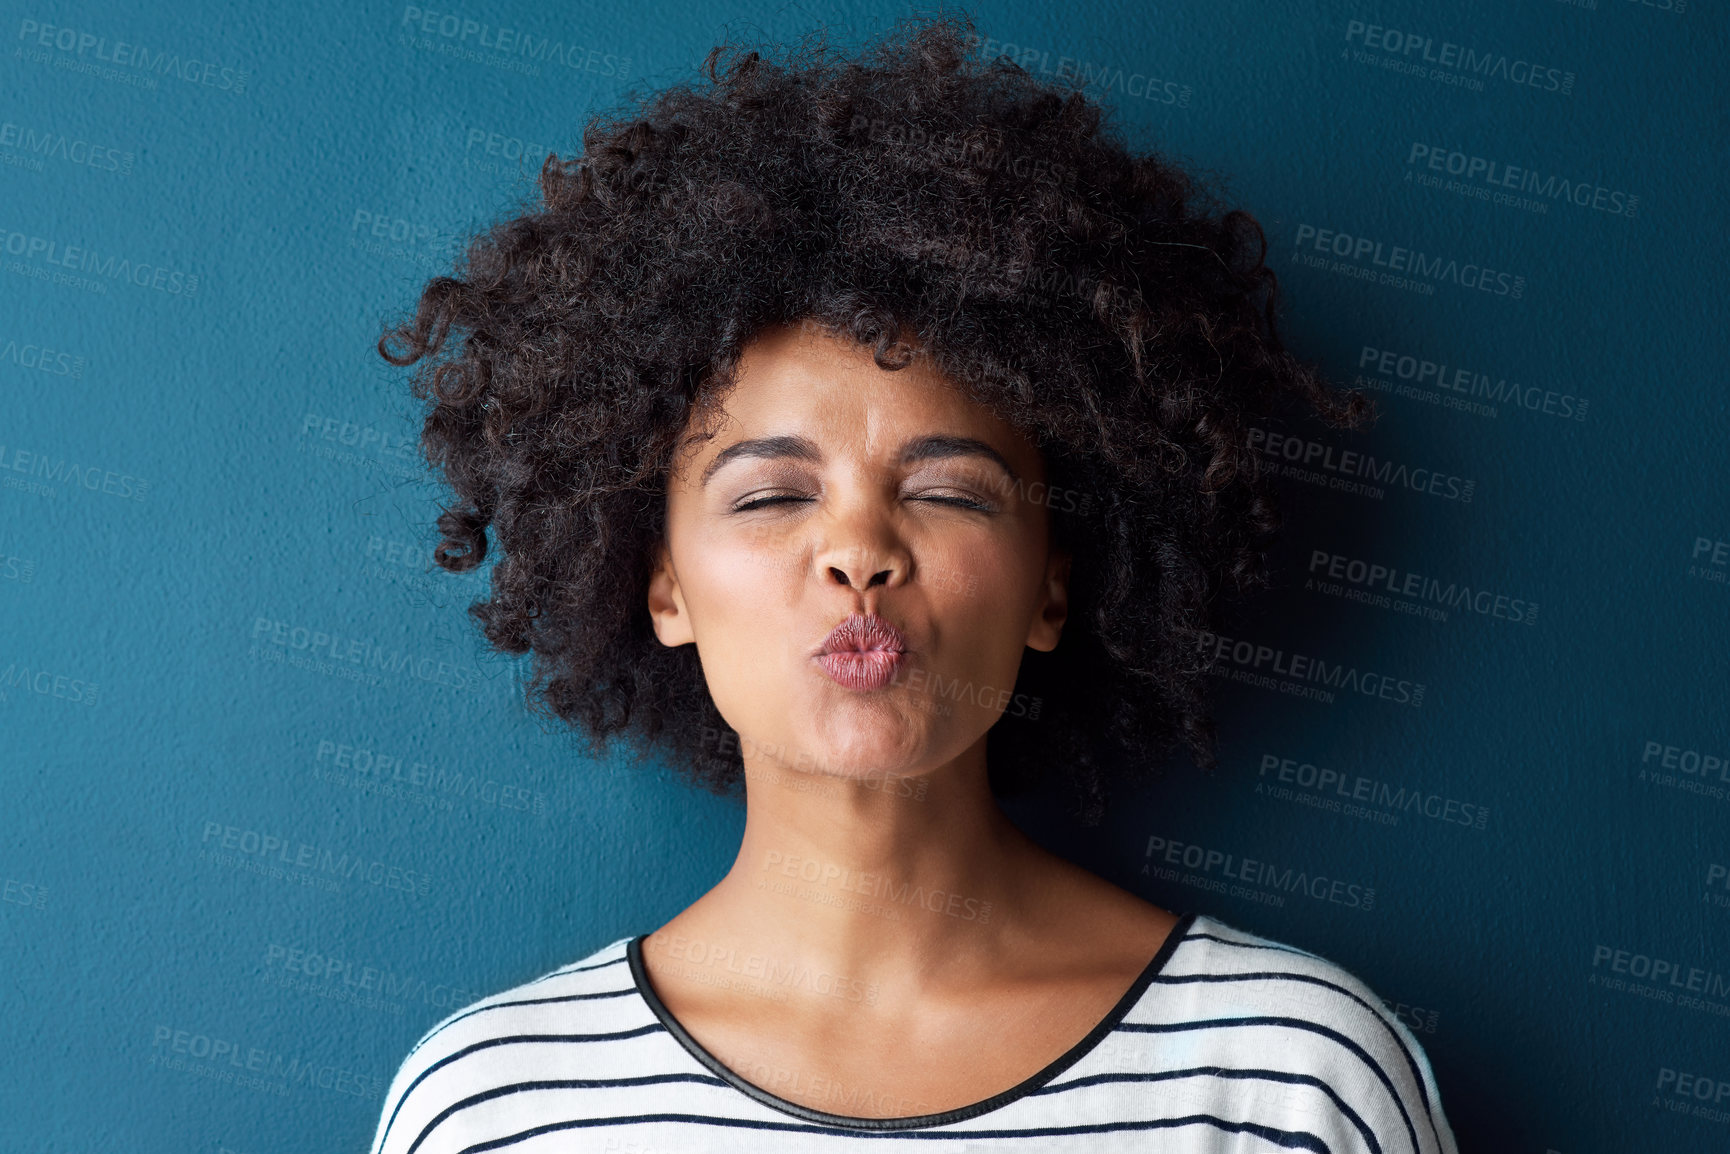 Buy stock photo Studio portrait of an attractive young woman pouting against a blue background